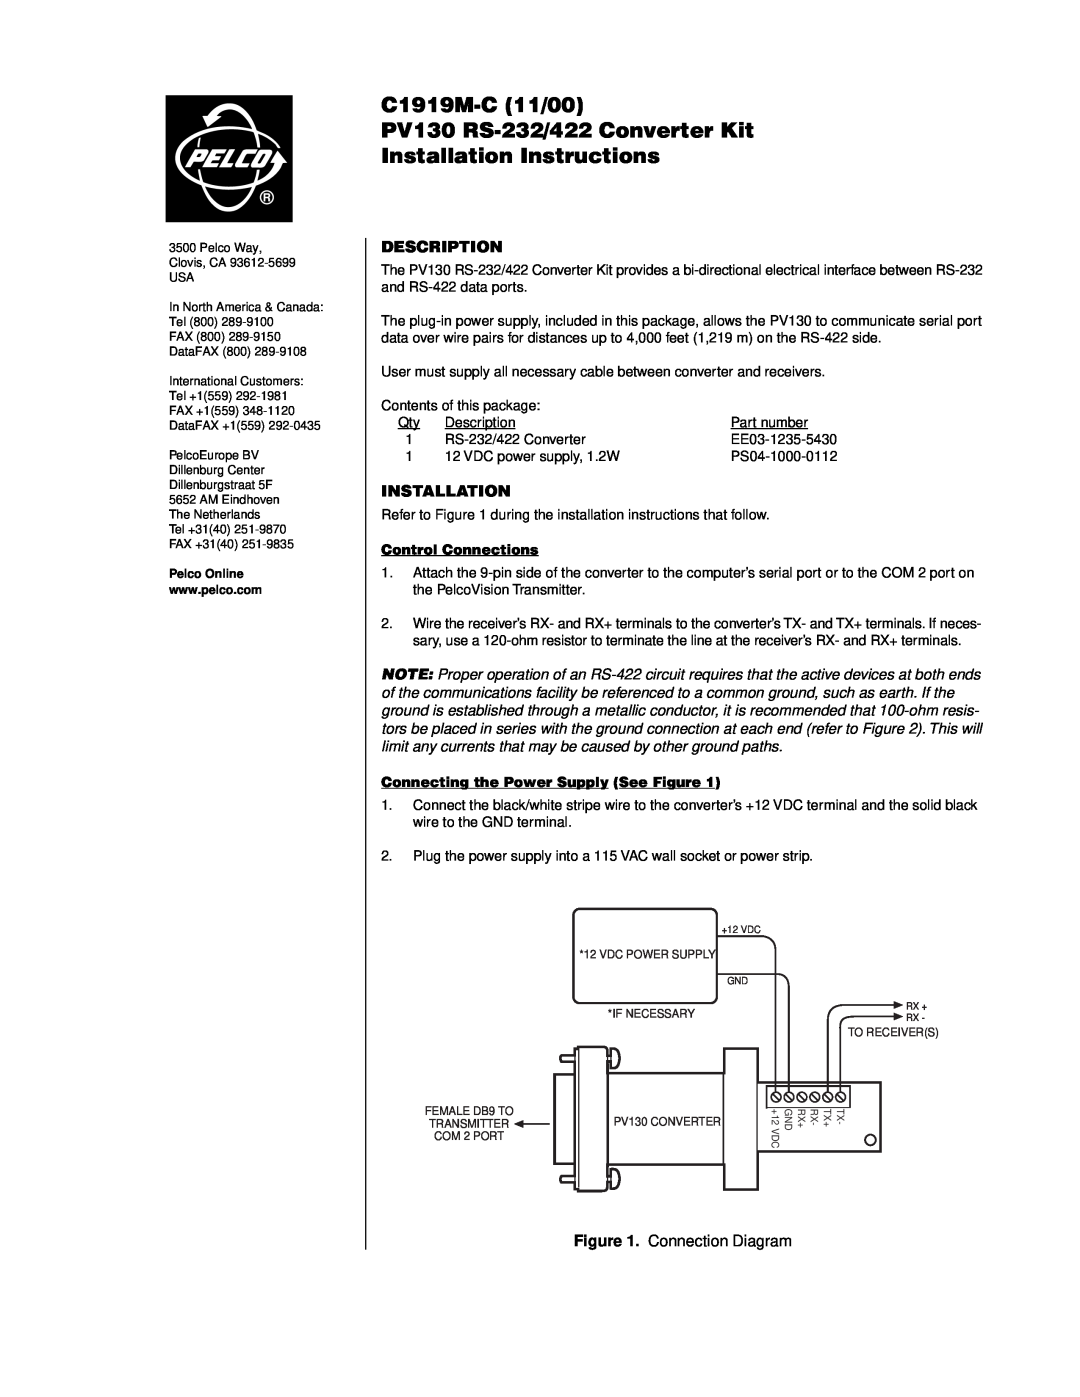 Pelco PV130 RS-422 installation instructions Description, Installation, Connection Diagram, Control Connections 